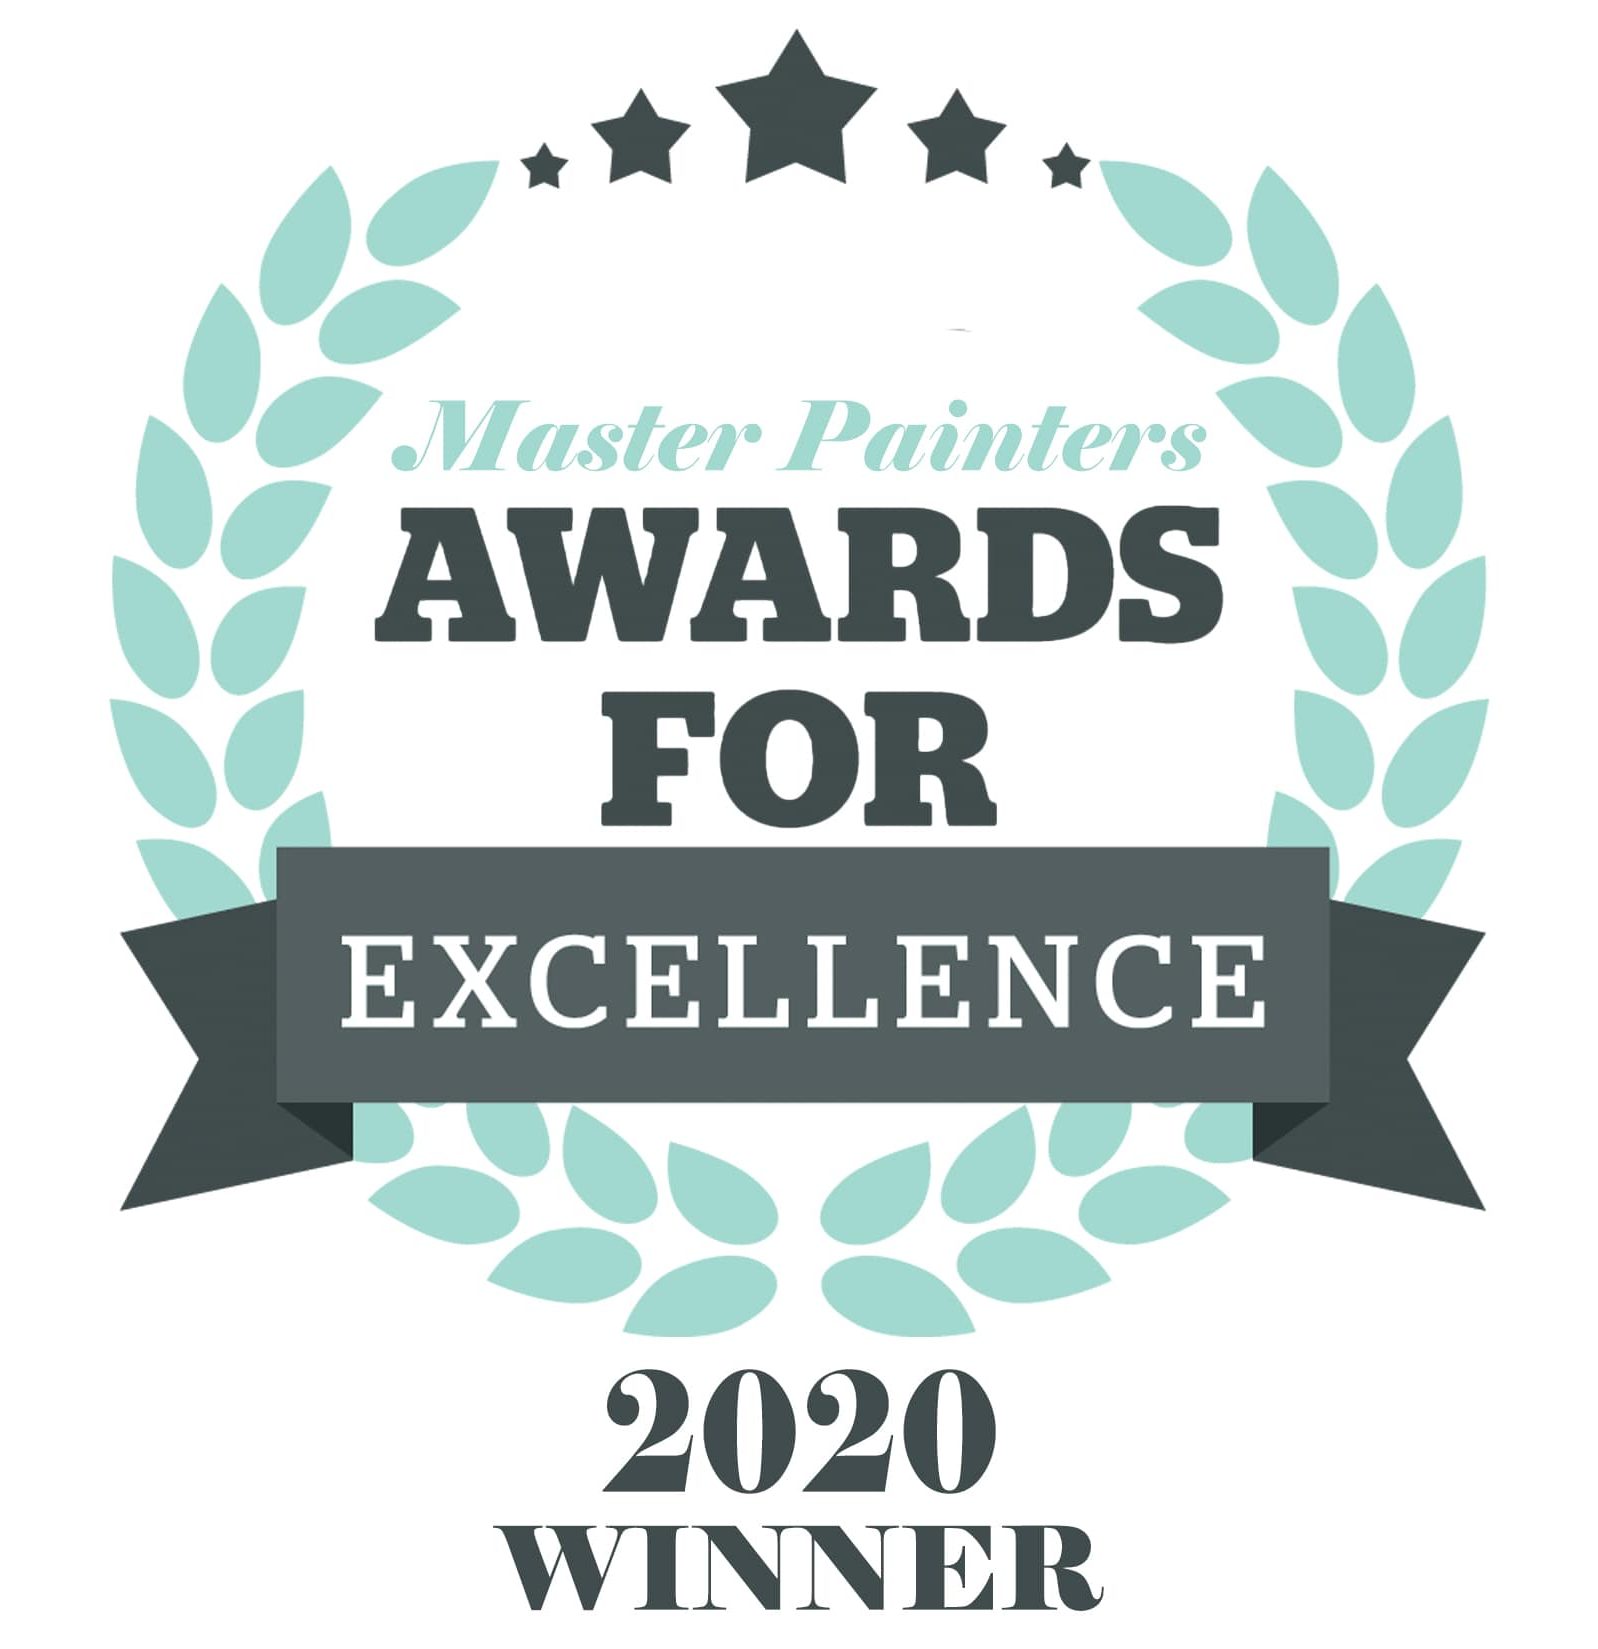 Master Painters Awards For Excellence 2020 Winner